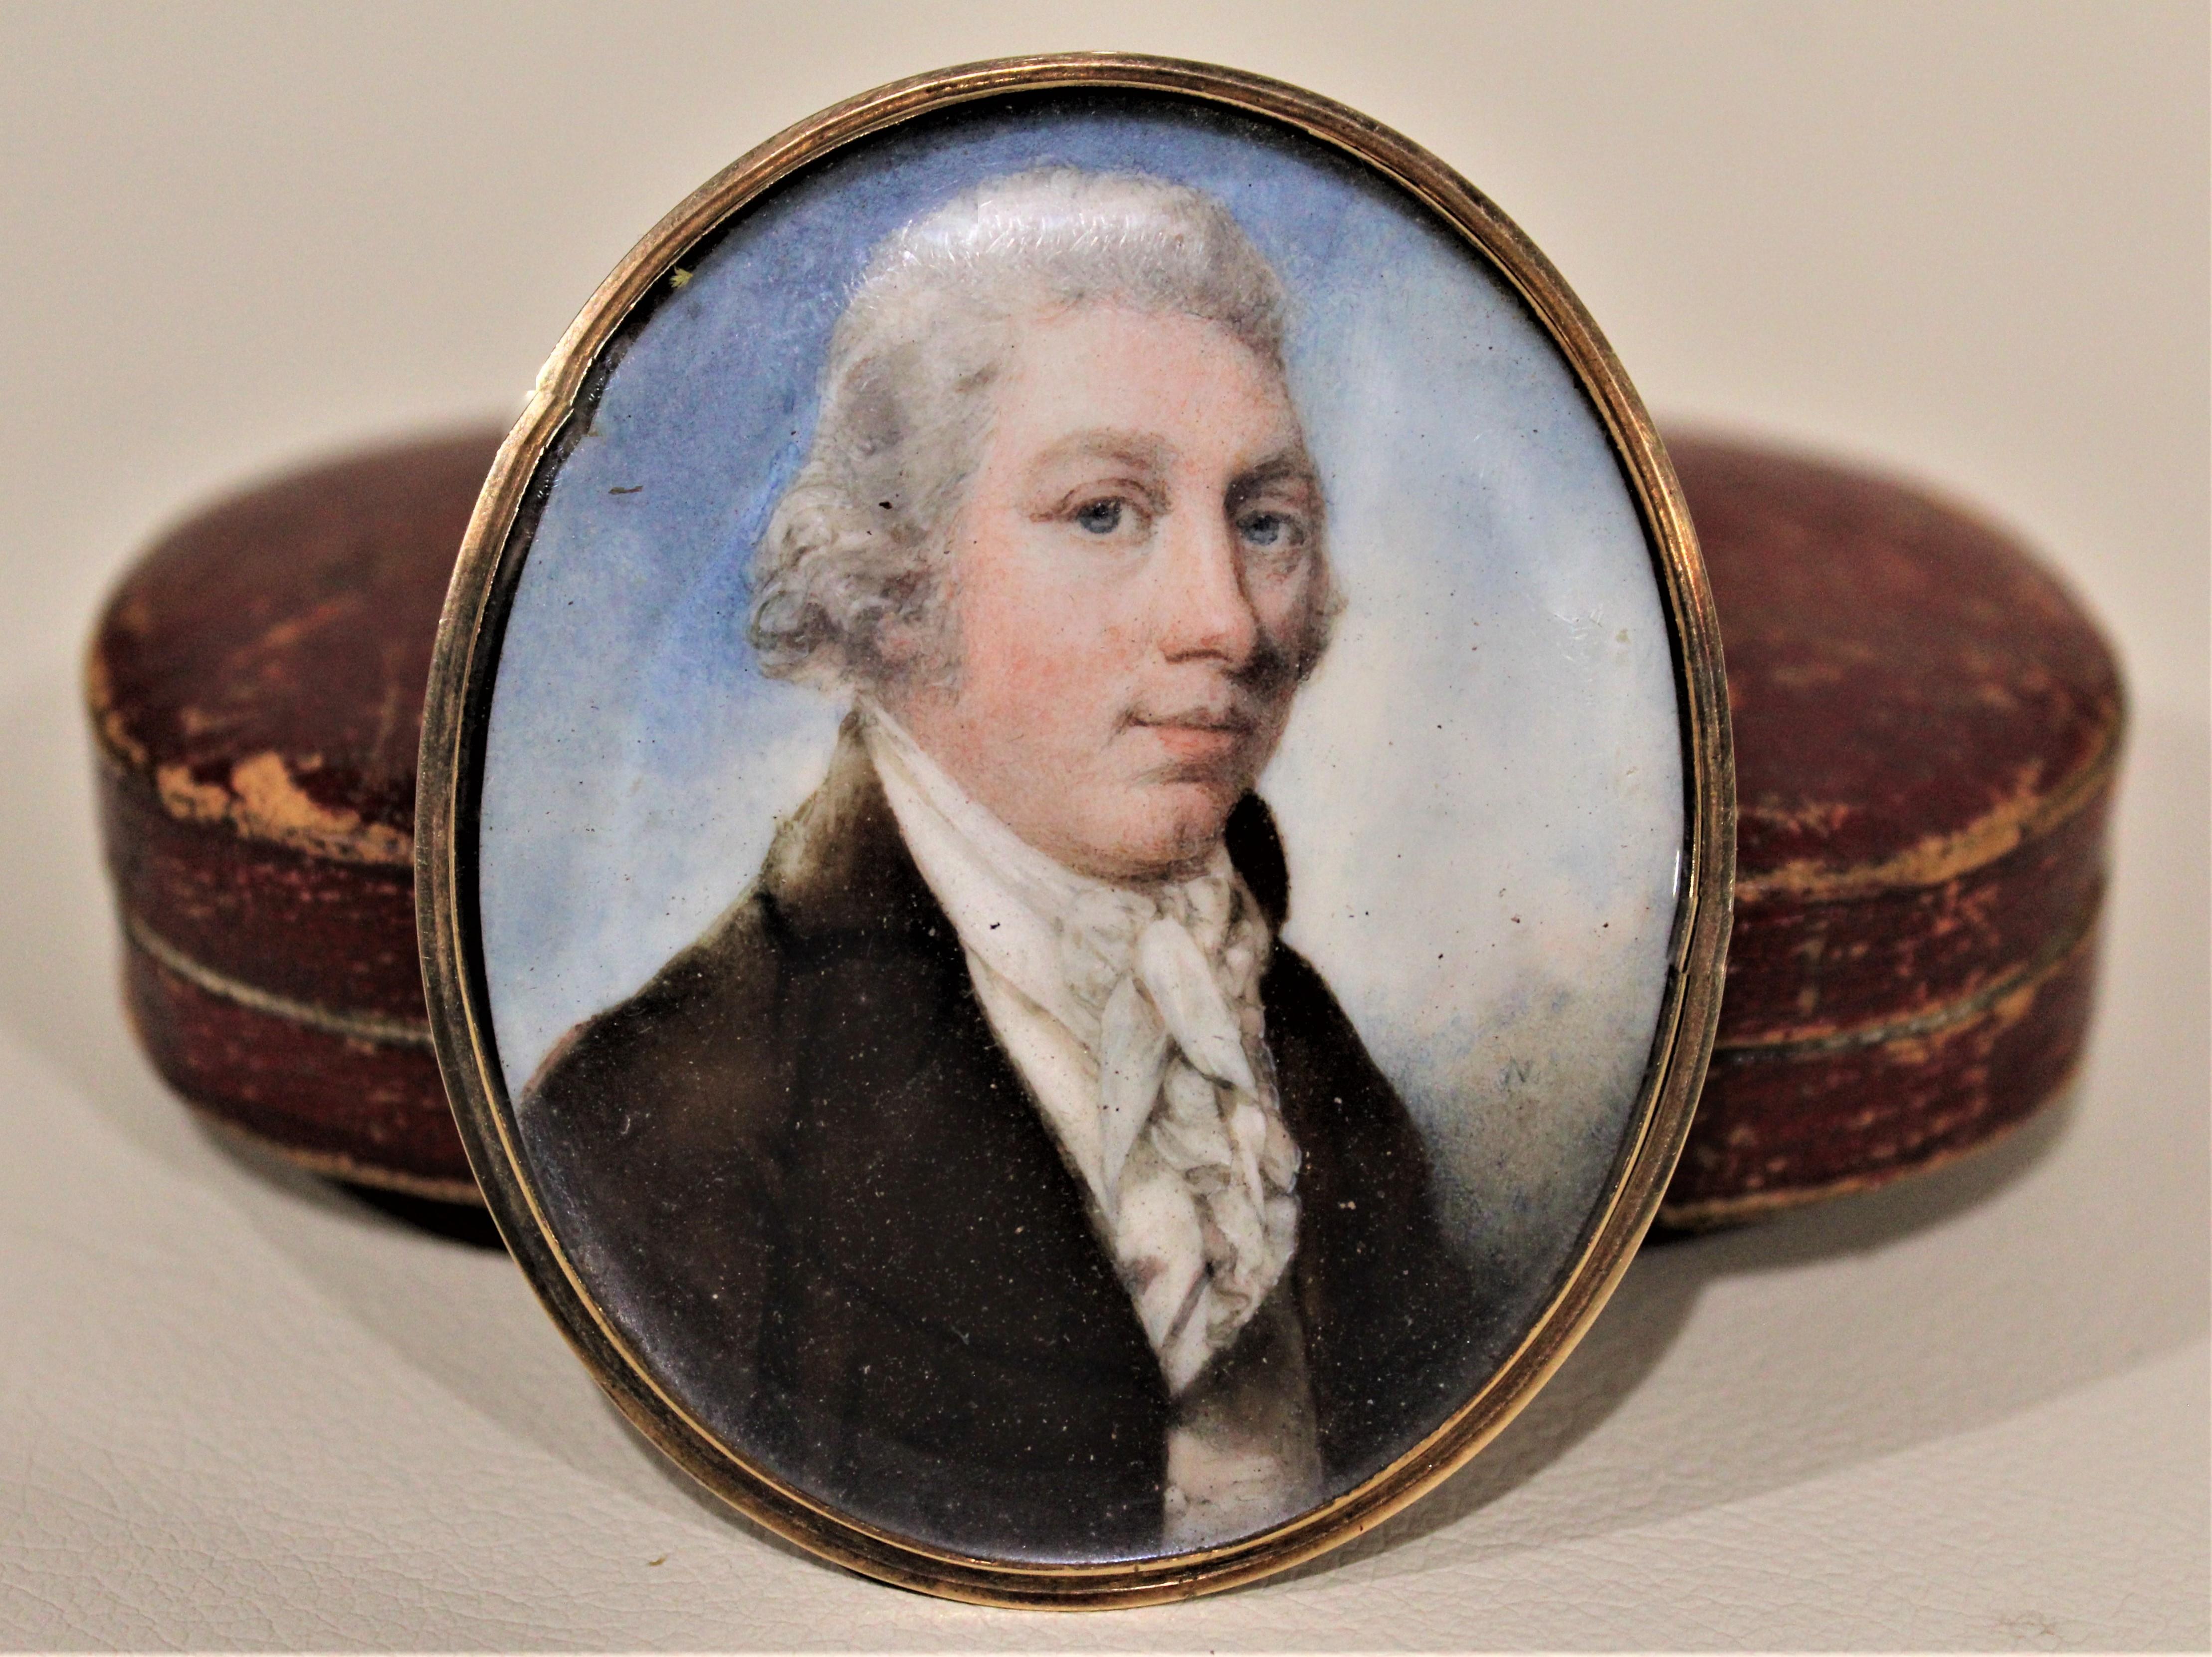 Dating from the late 17th century and done in the Federalist style, this finely detailed and well executed hand painted miniature portrait on bone of a period nobleman can be worn as a brooch, or displayed as a painting. The back is unmarked, but